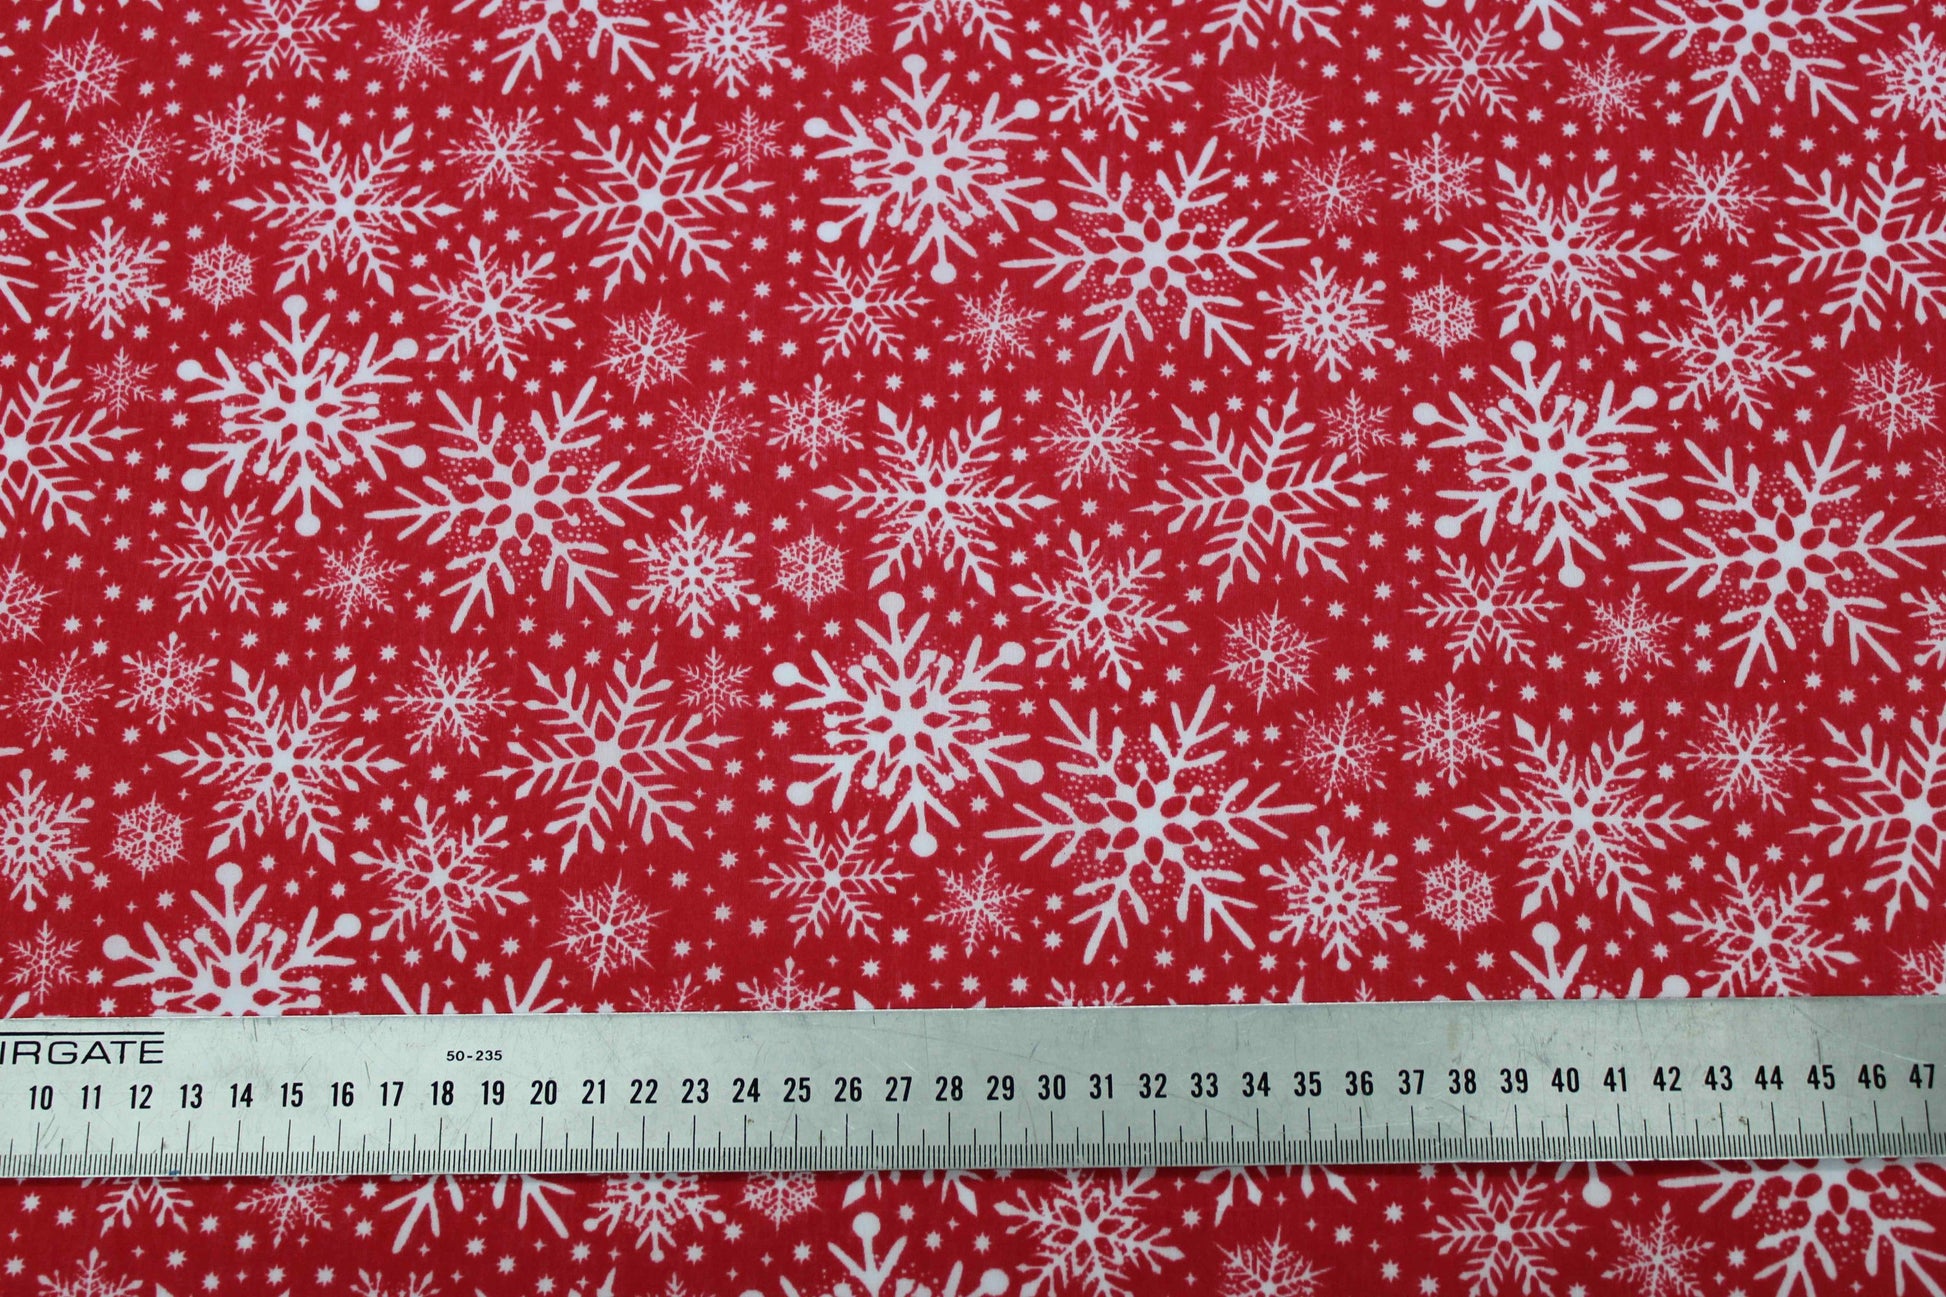 various white snowflake designs on red fabric